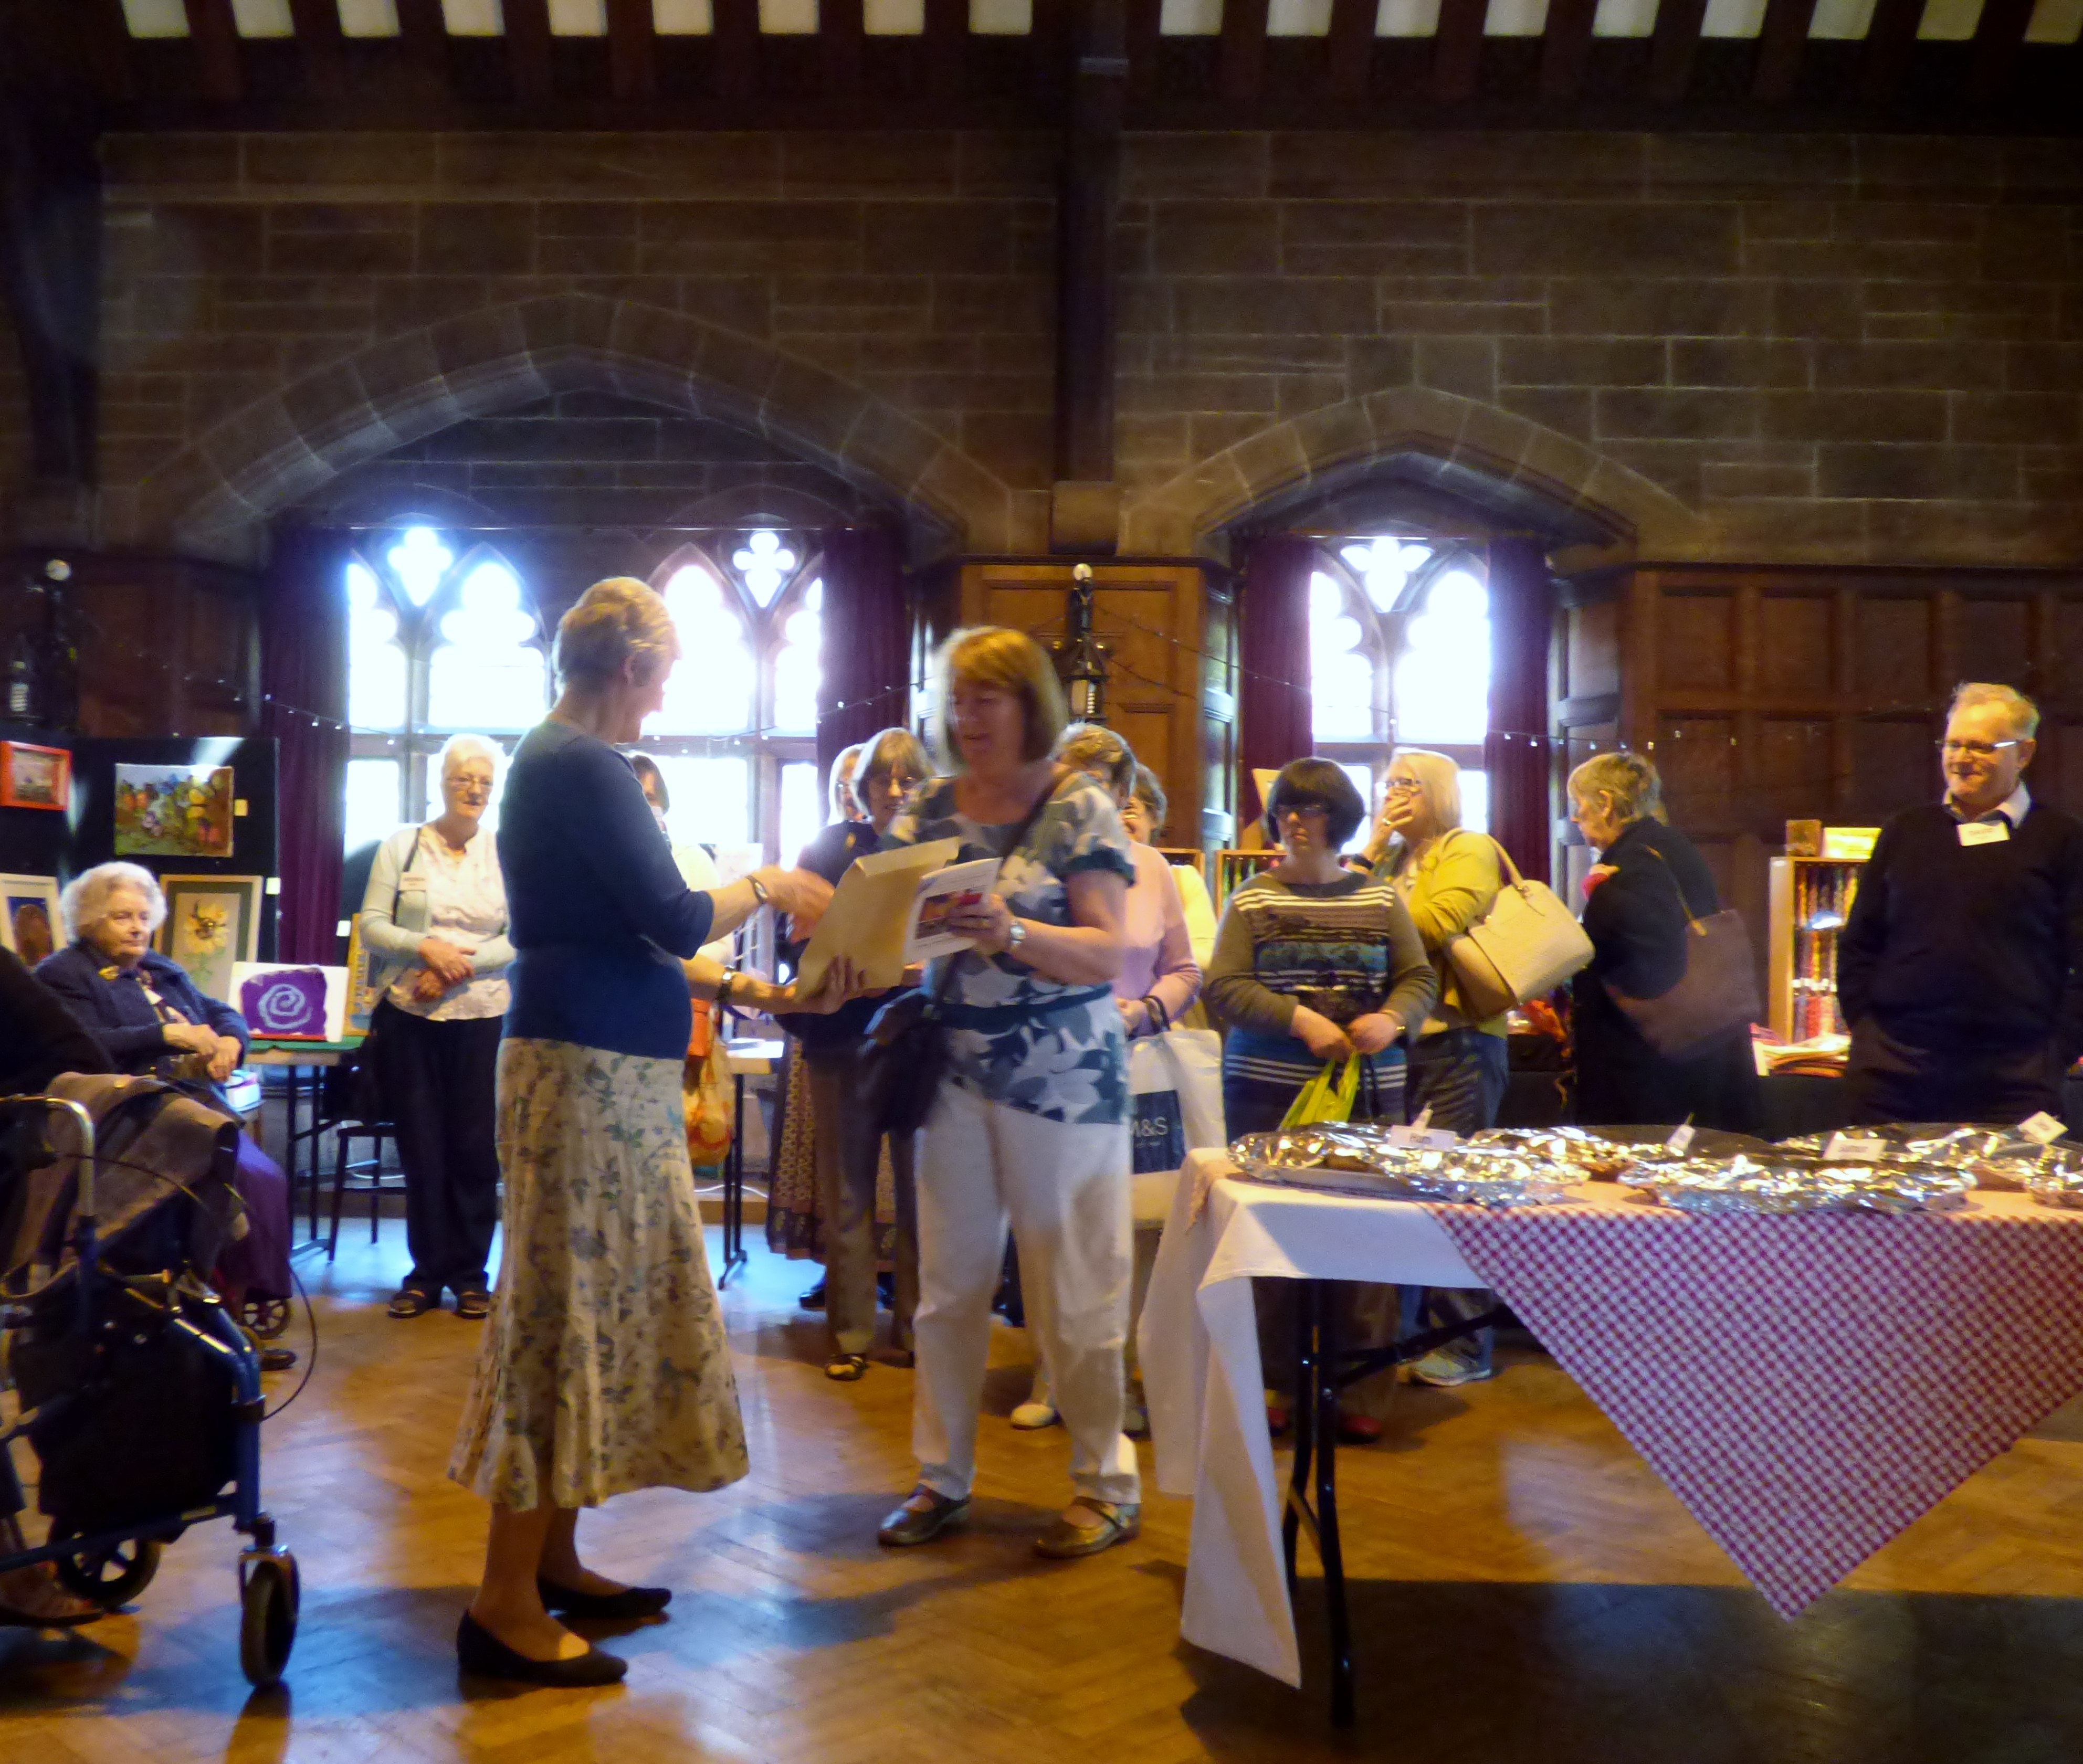 Jean Critchley is presented with her 25 year badge at MEG Summer Tea Party 2016